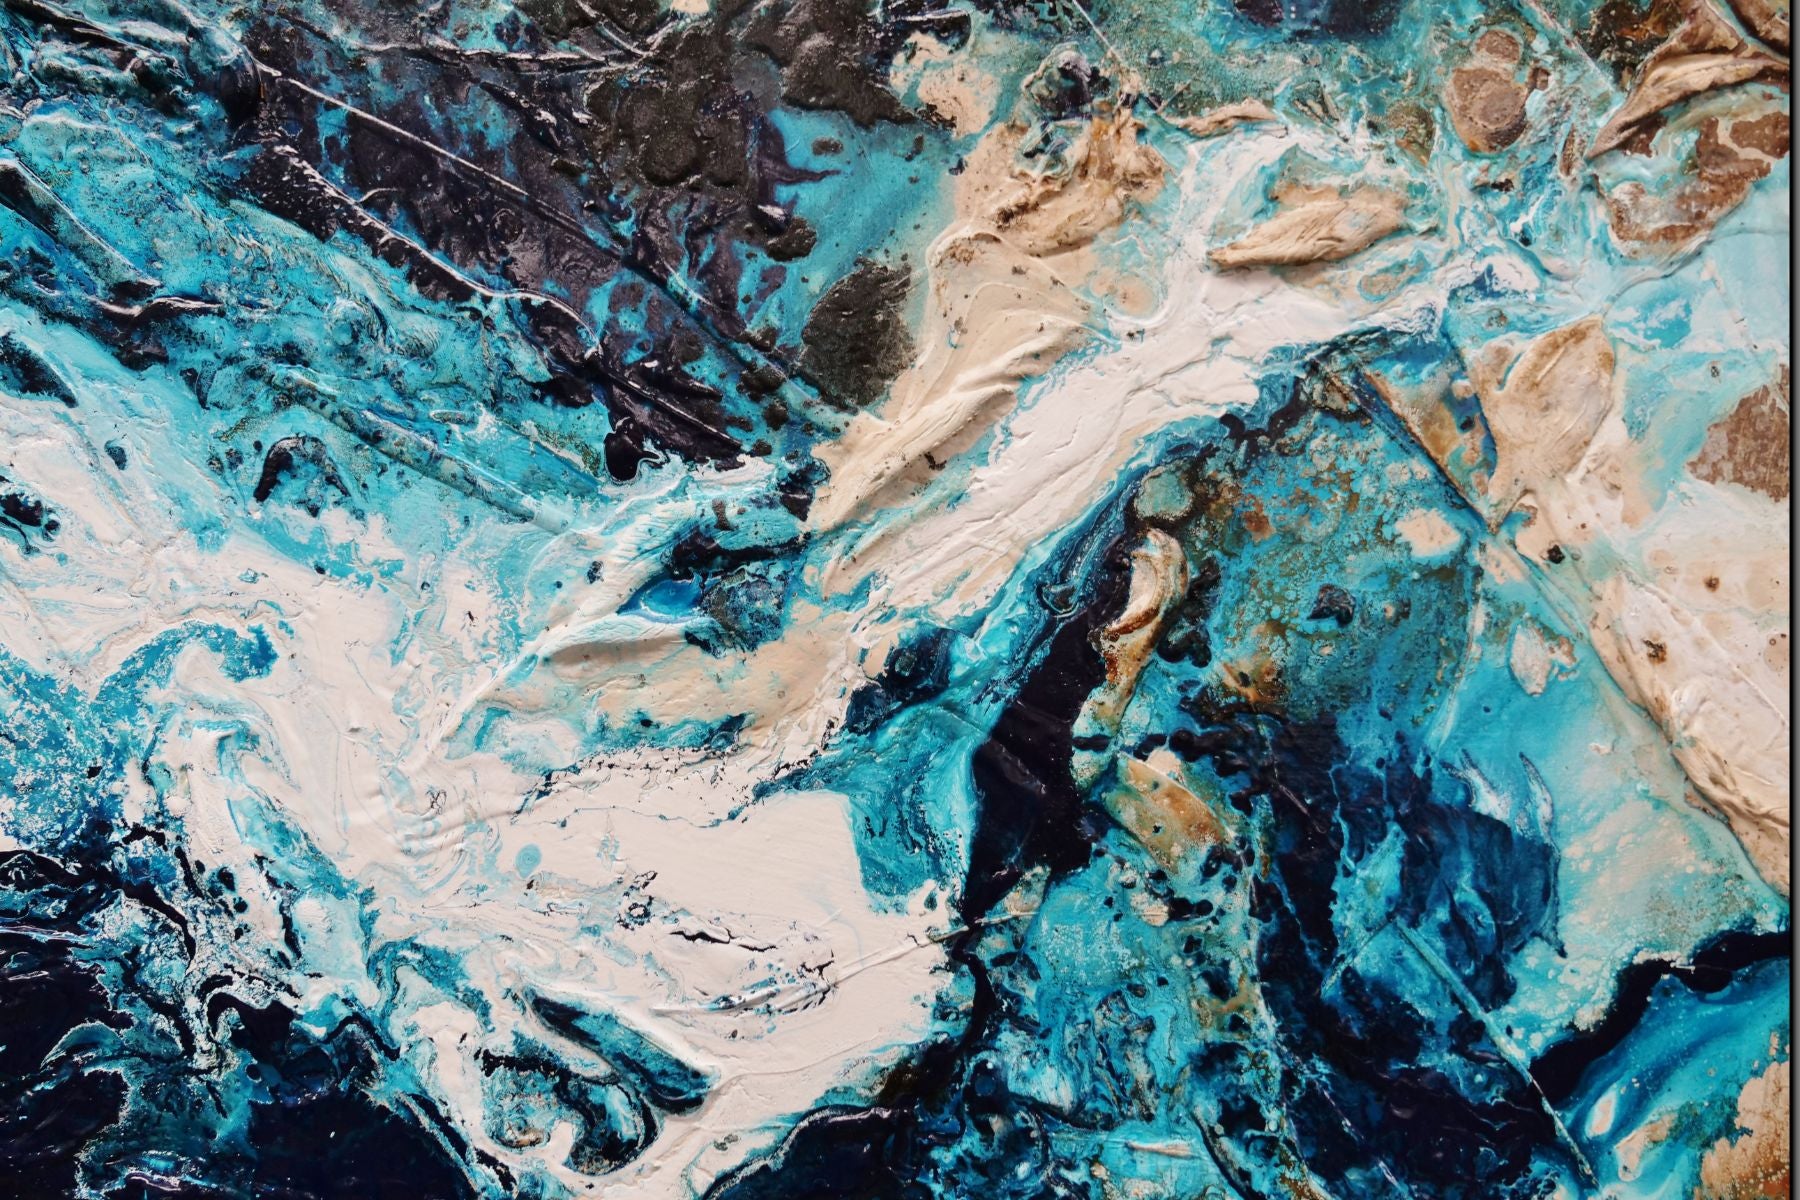 Southern and Rust 120cm x 120cm Teal Phalto White Textured Abstract Painting (SOLD)